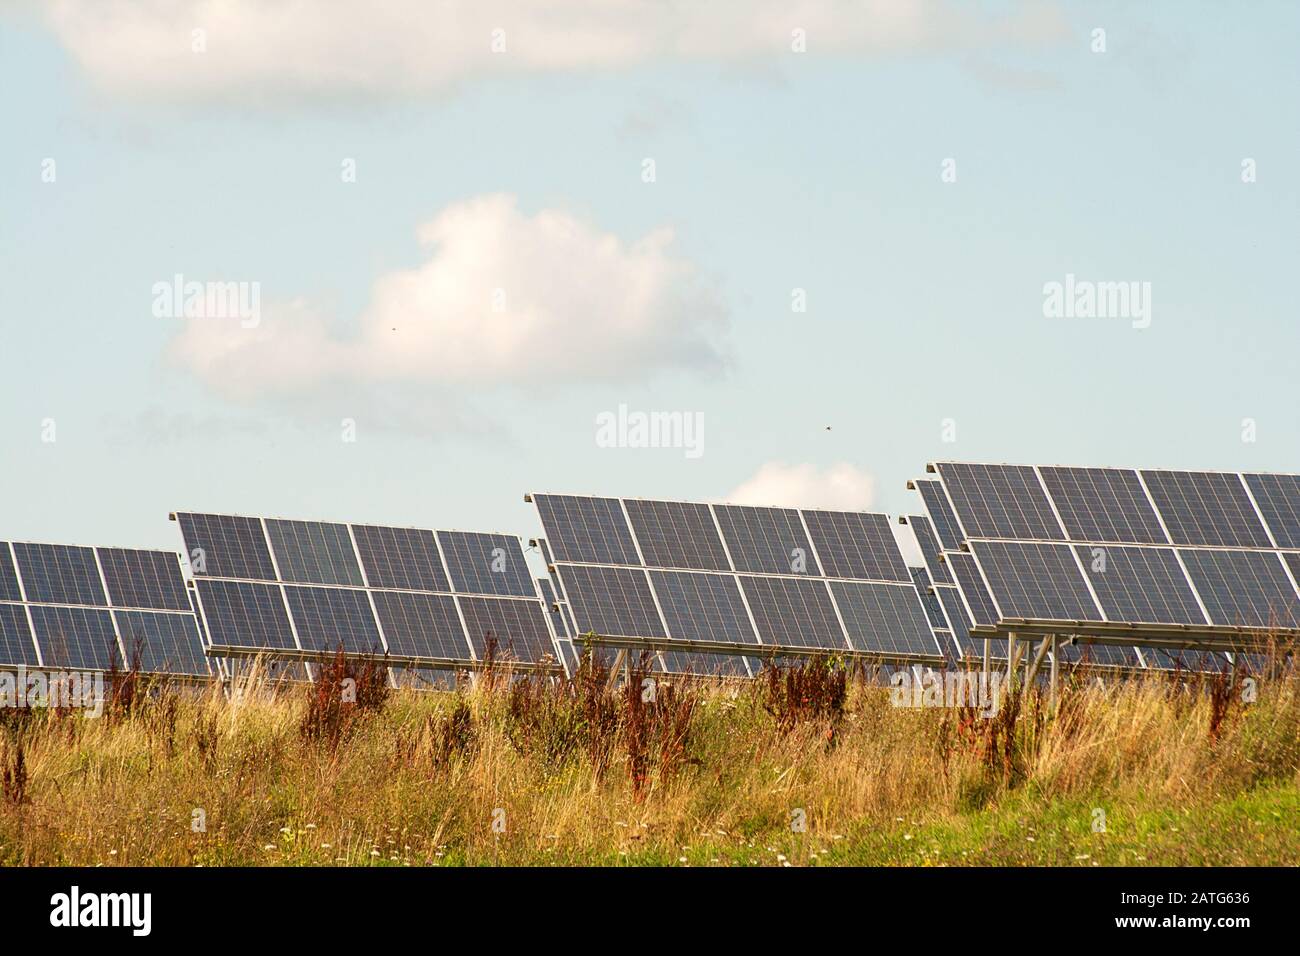 Solar cells of a photovoltaic system to generate energy through solar energy Stock Photo